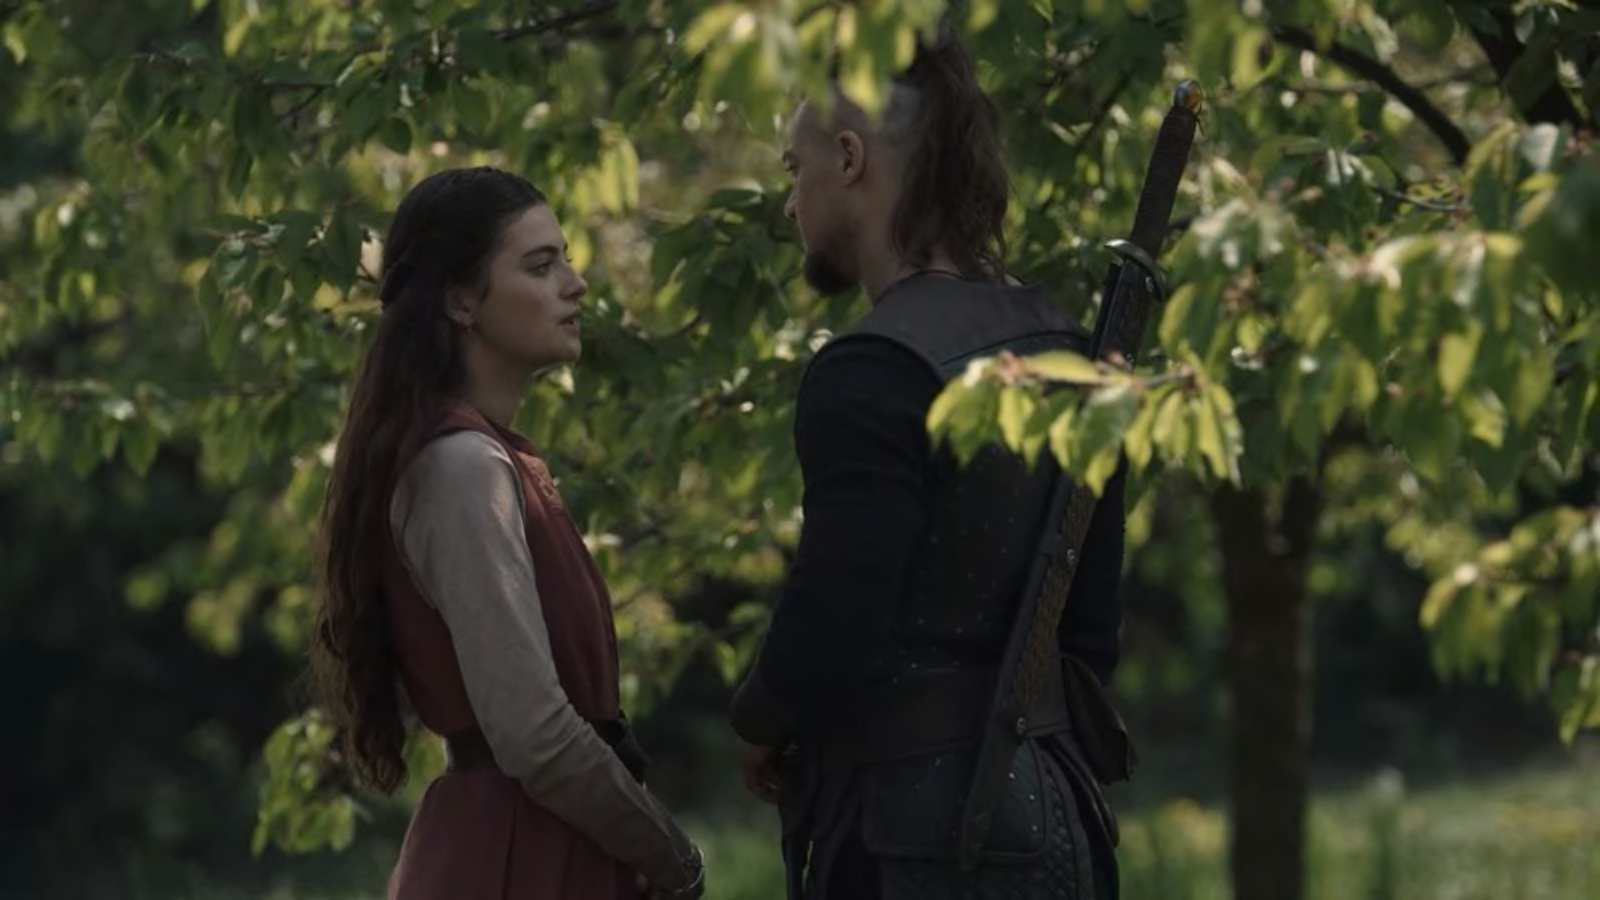 The Last Kingdom What Couples Are We Shipping Ahead Of Season 5